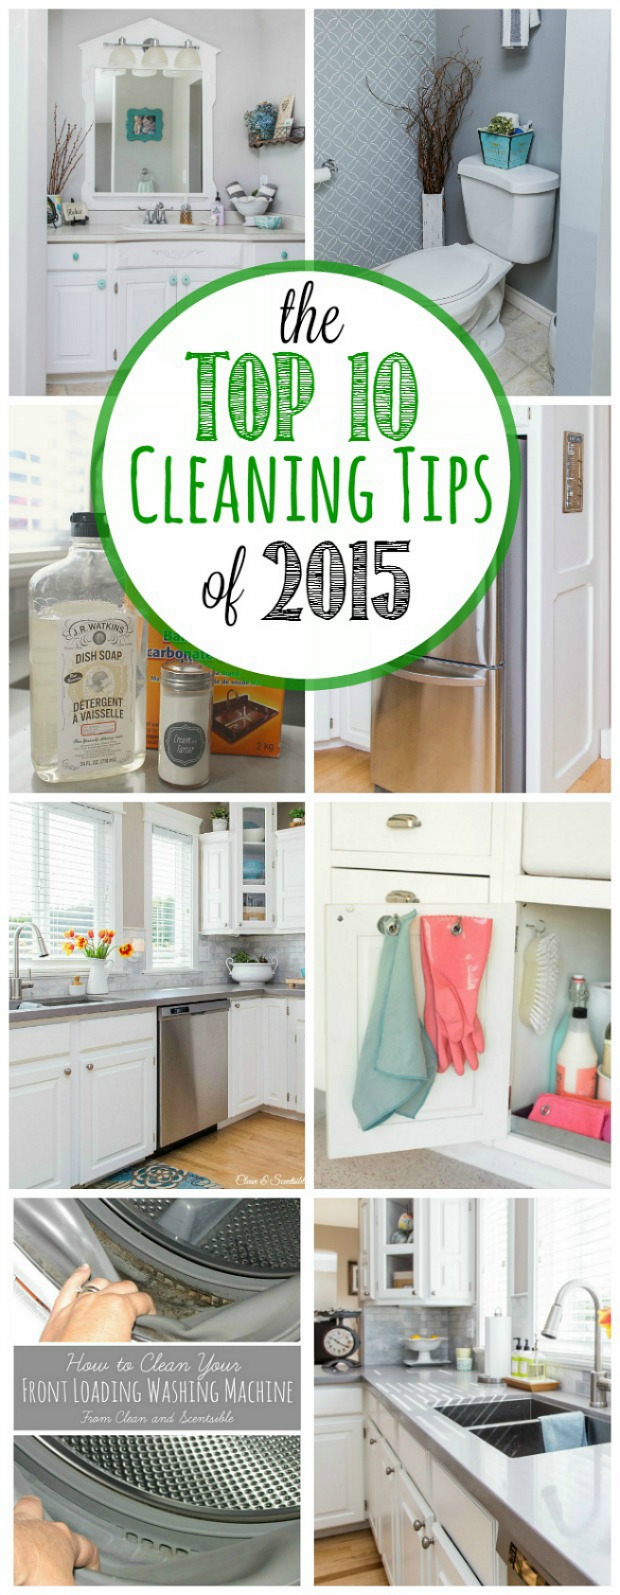 Awesome cleaning tips for every room in your home. A must read!